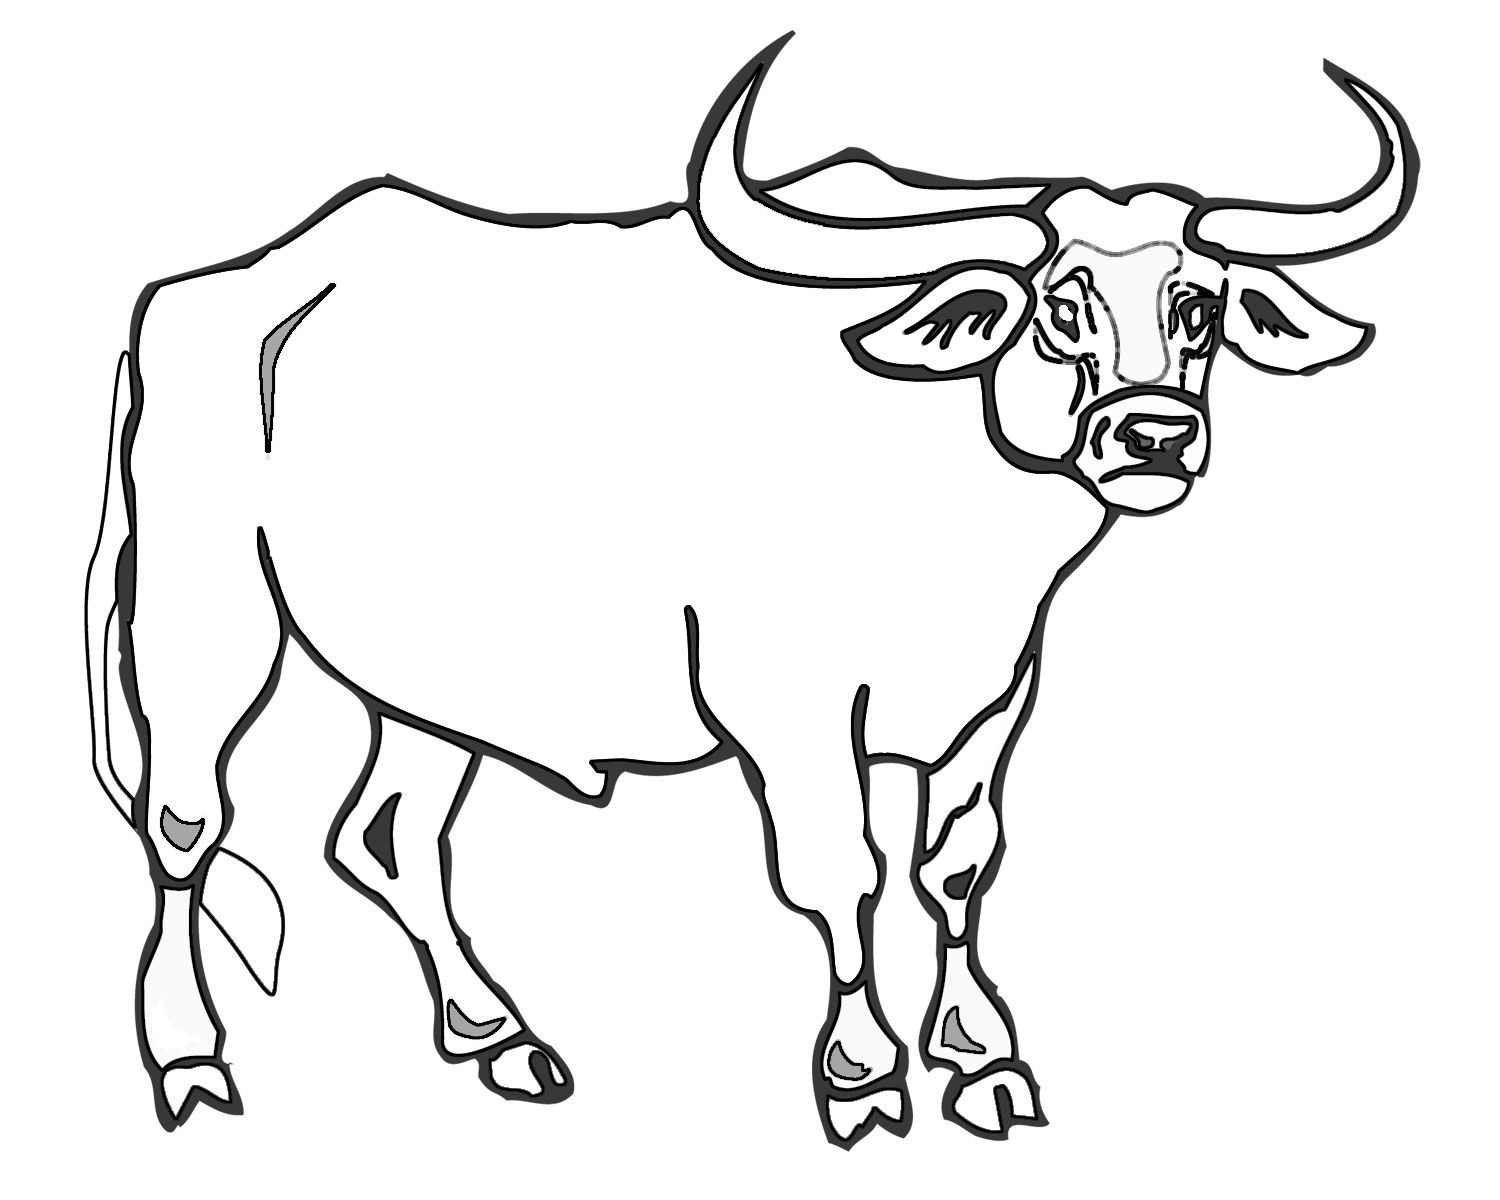 27 Lovely Images Musk Ox Coloring Page Musk Ox Coloring Page At Motherhood